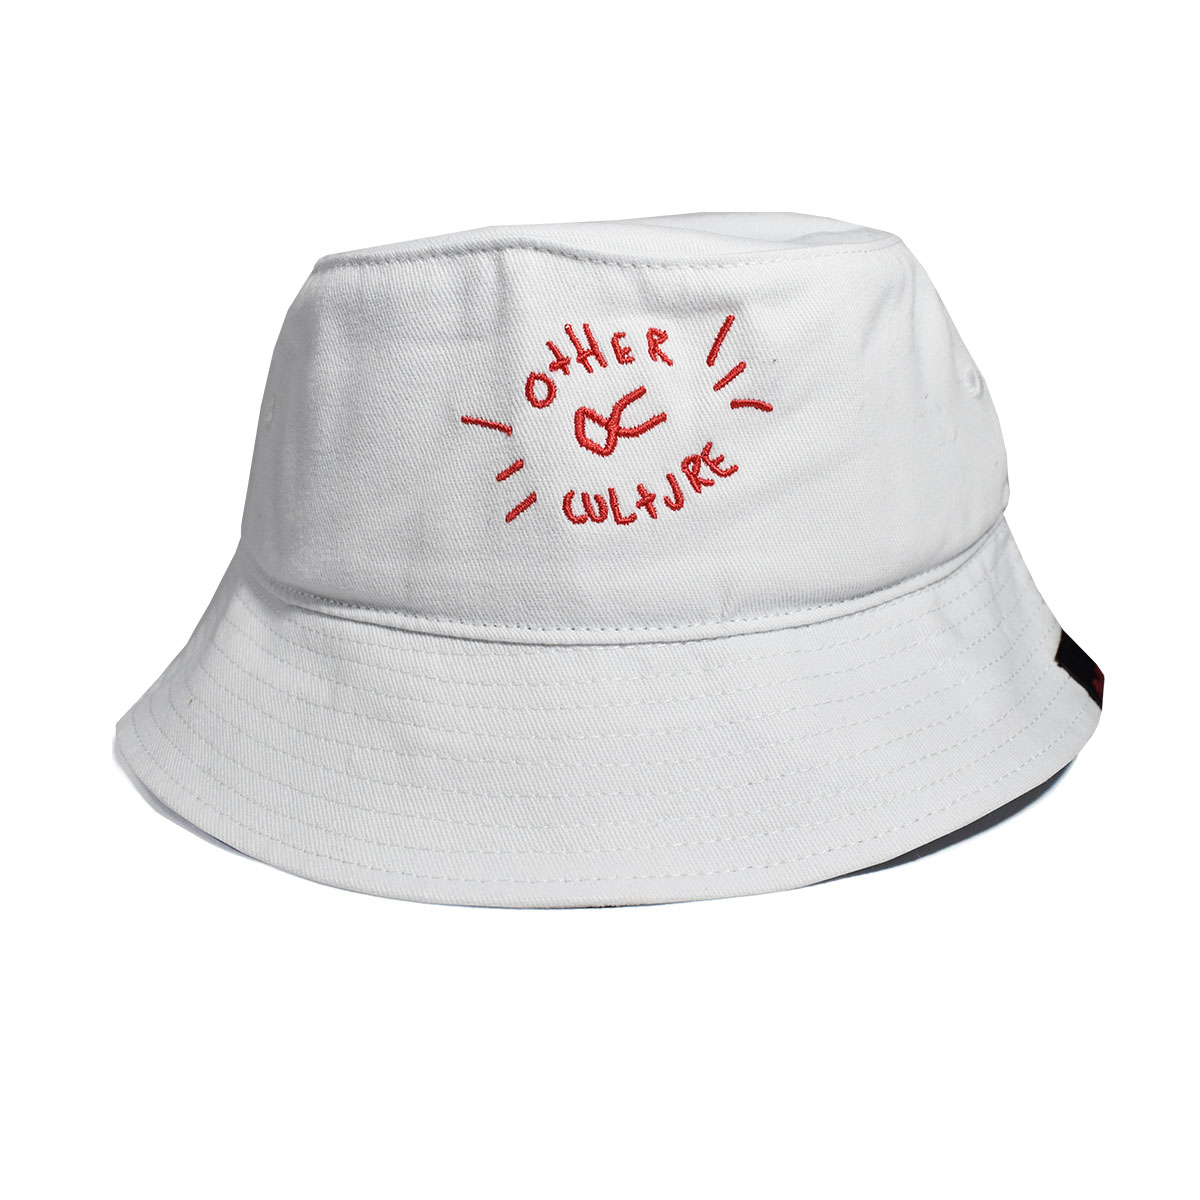 Bucket Hat Other Culture Cactus White